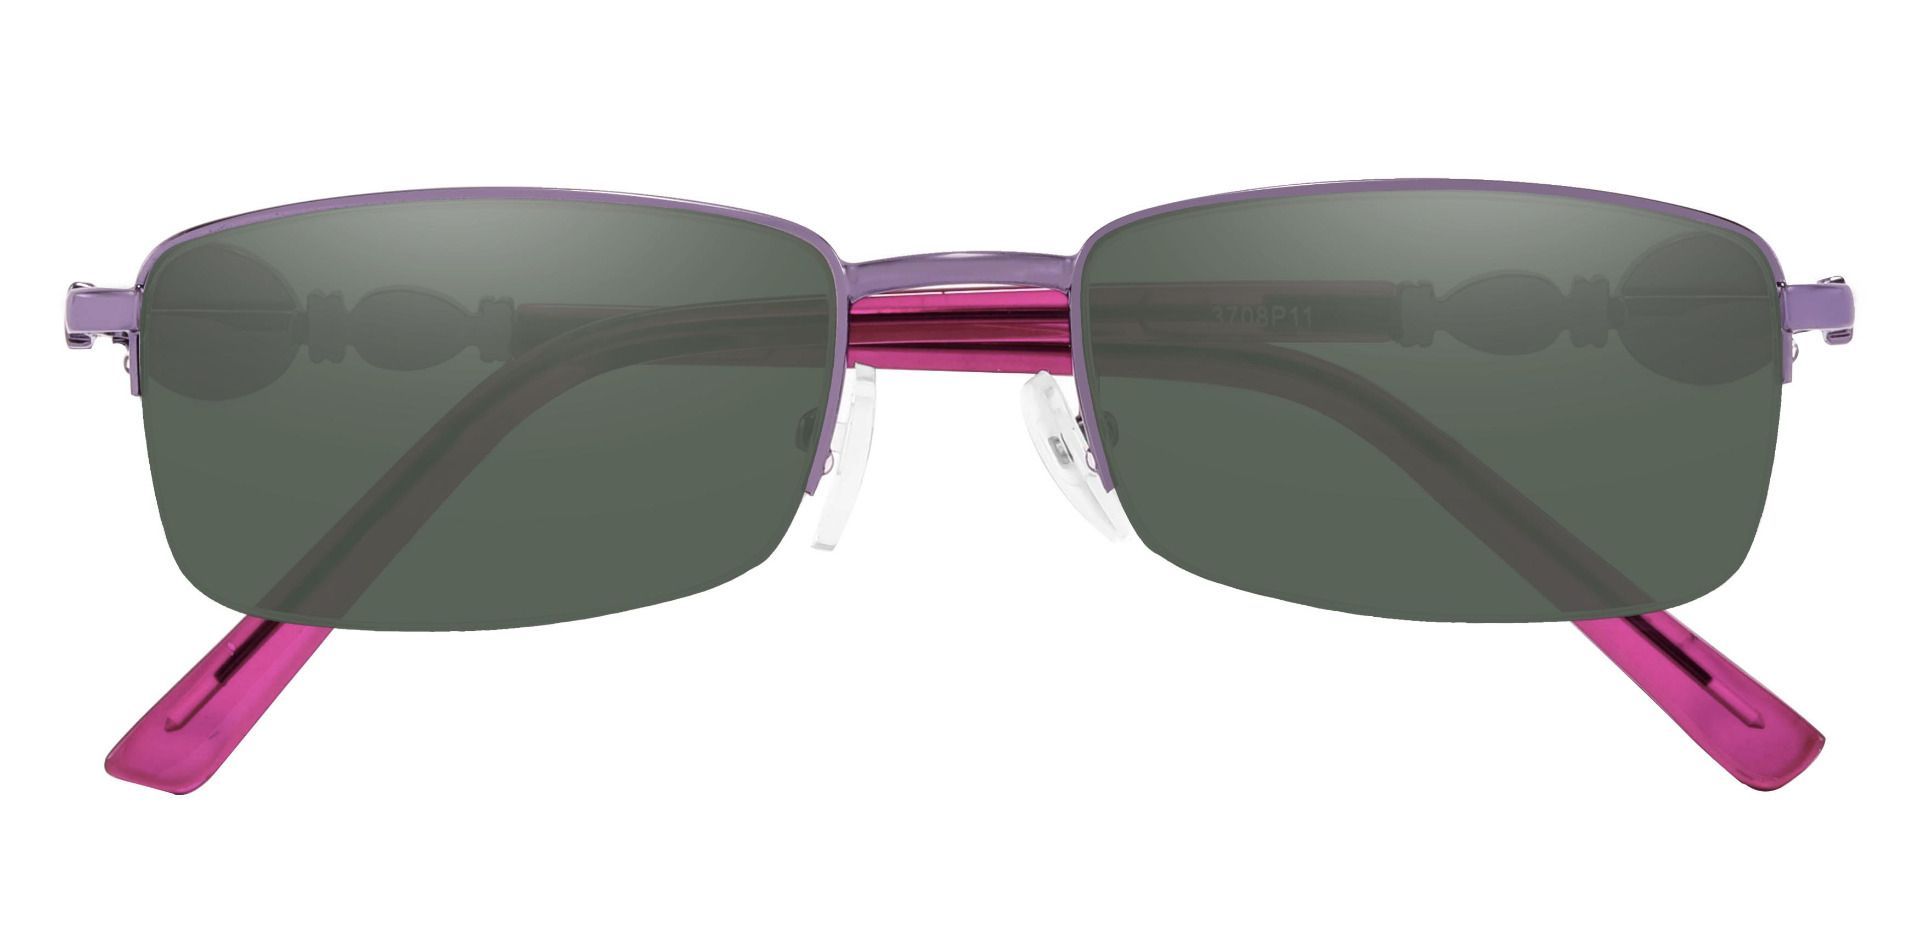 Crowley Rectangle Reading Sunglasses - Purple Frame With Green Lenses